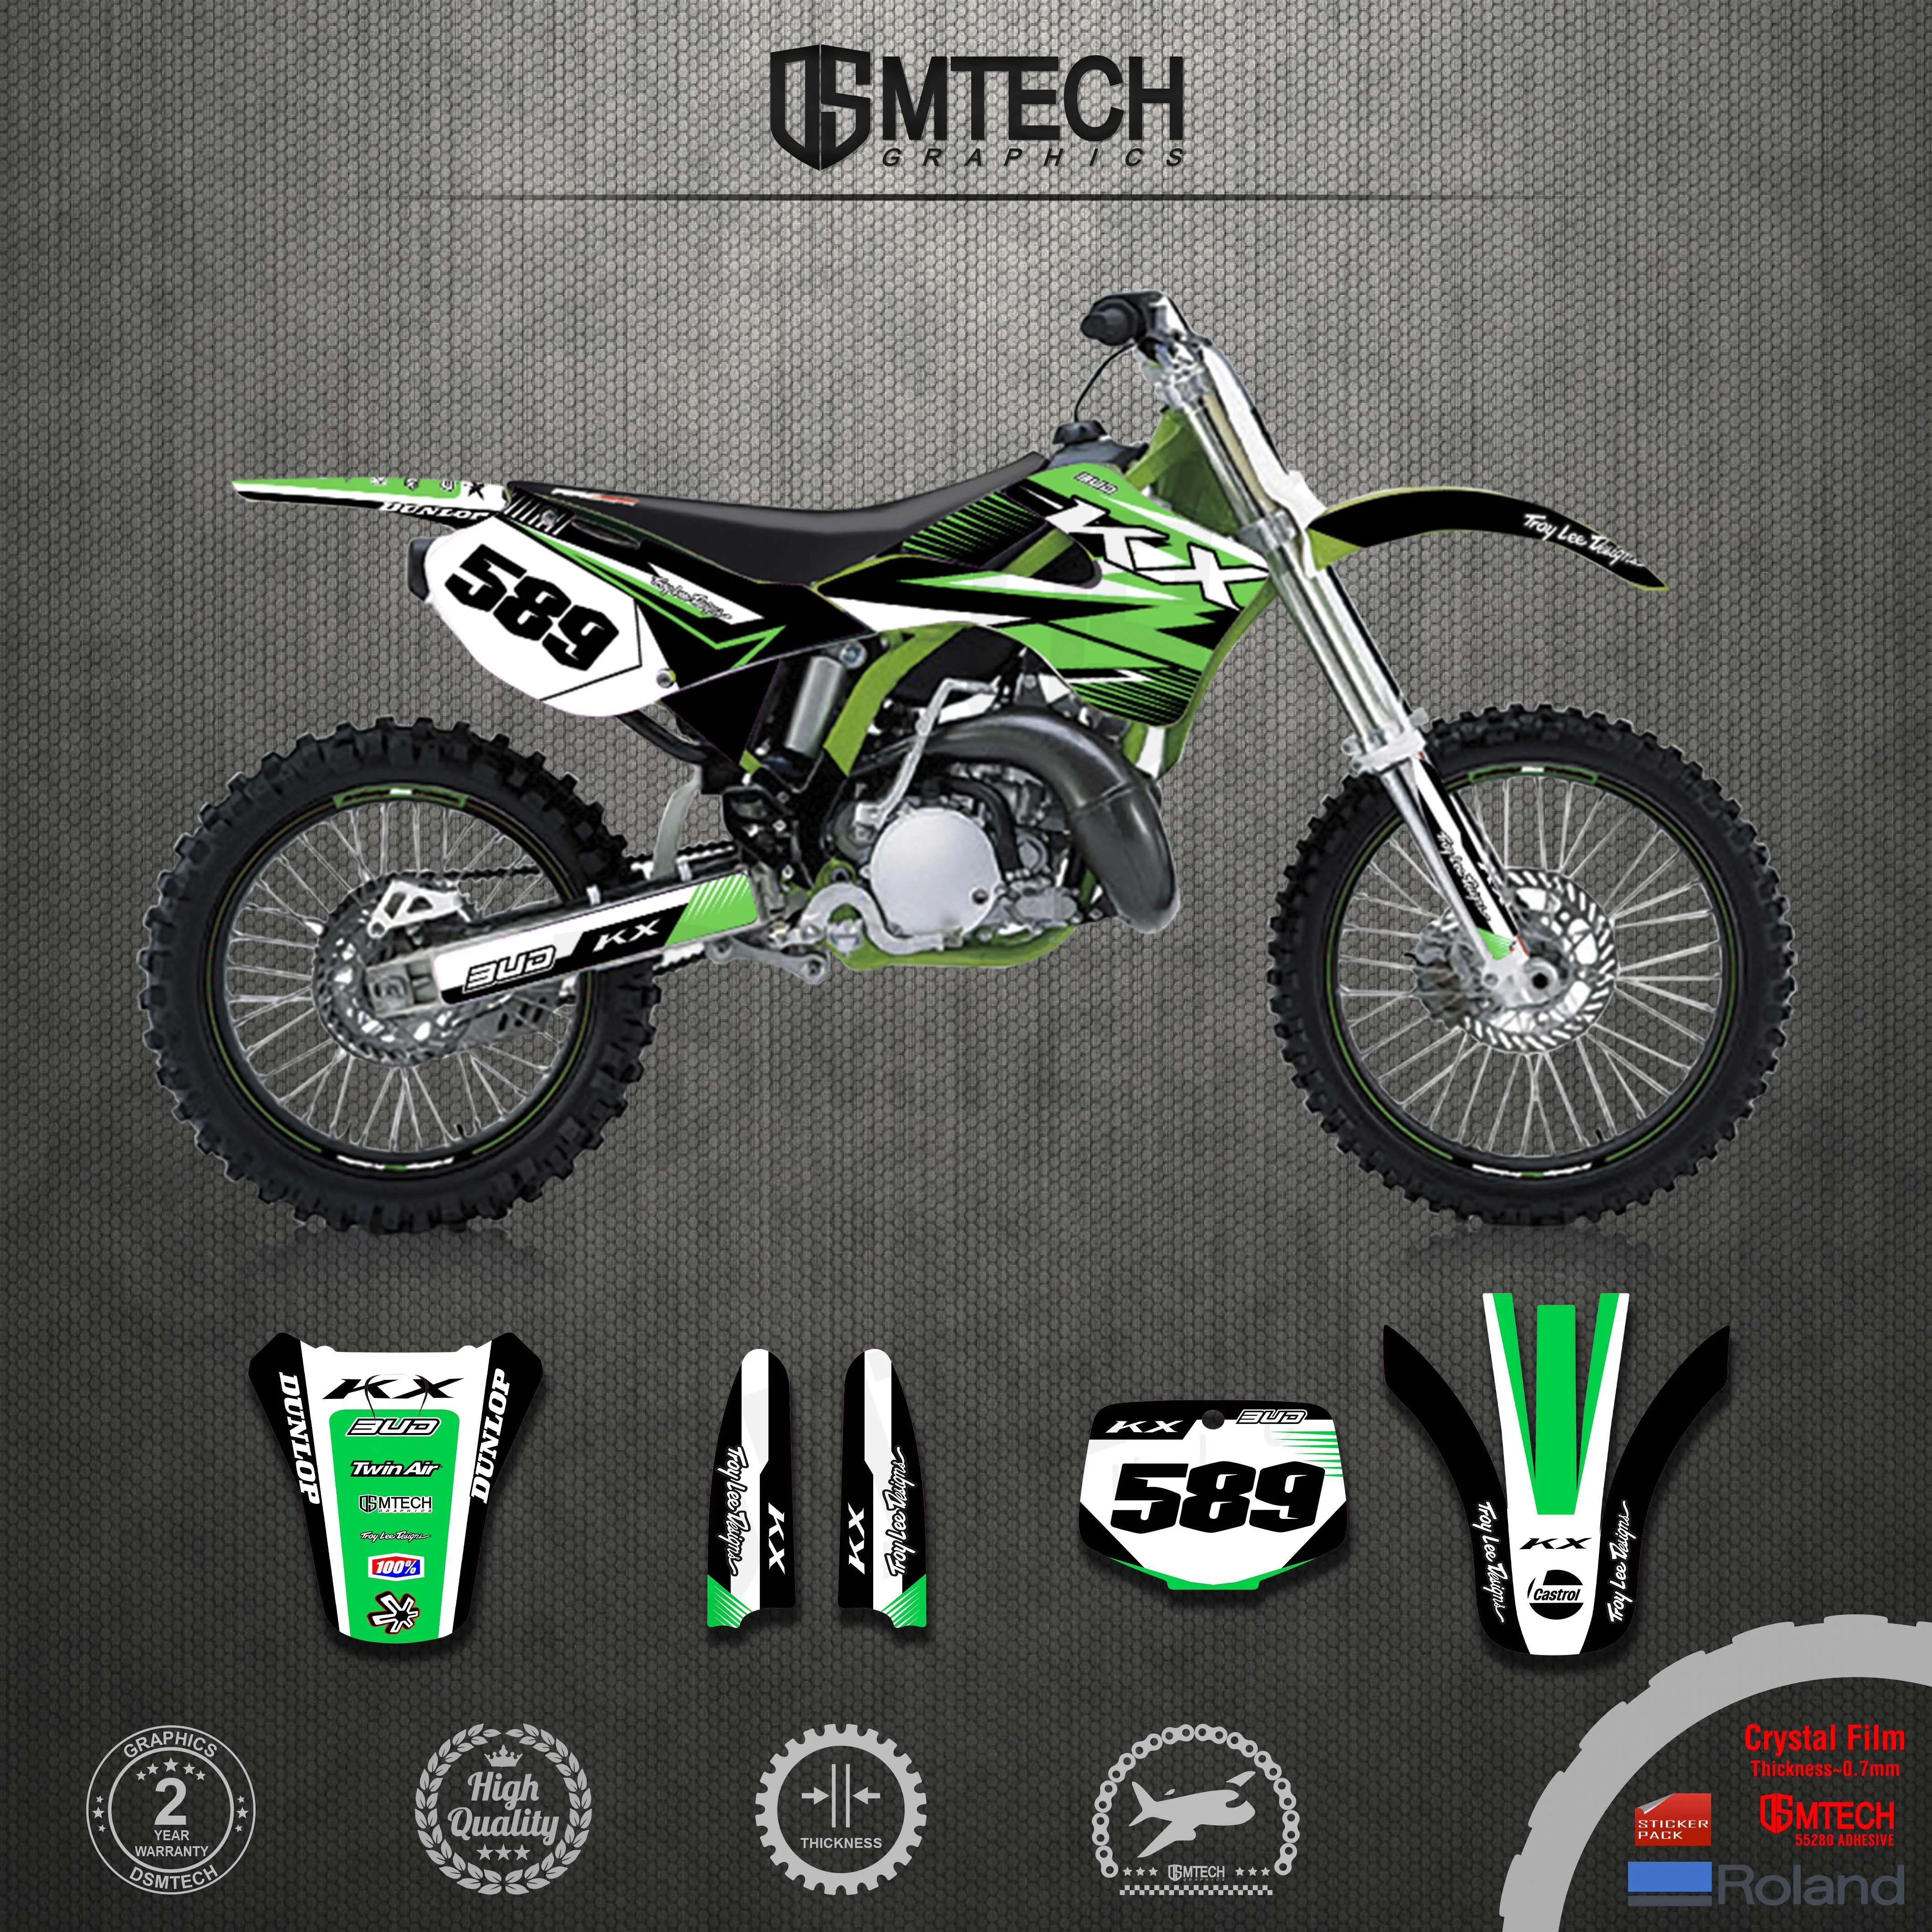 DSMTECH Full Graphics Decals Stickers Motorcycle Background Custom For Kawasaki  KX125  KX250 KX 125 250 1999 2000 2001 2002